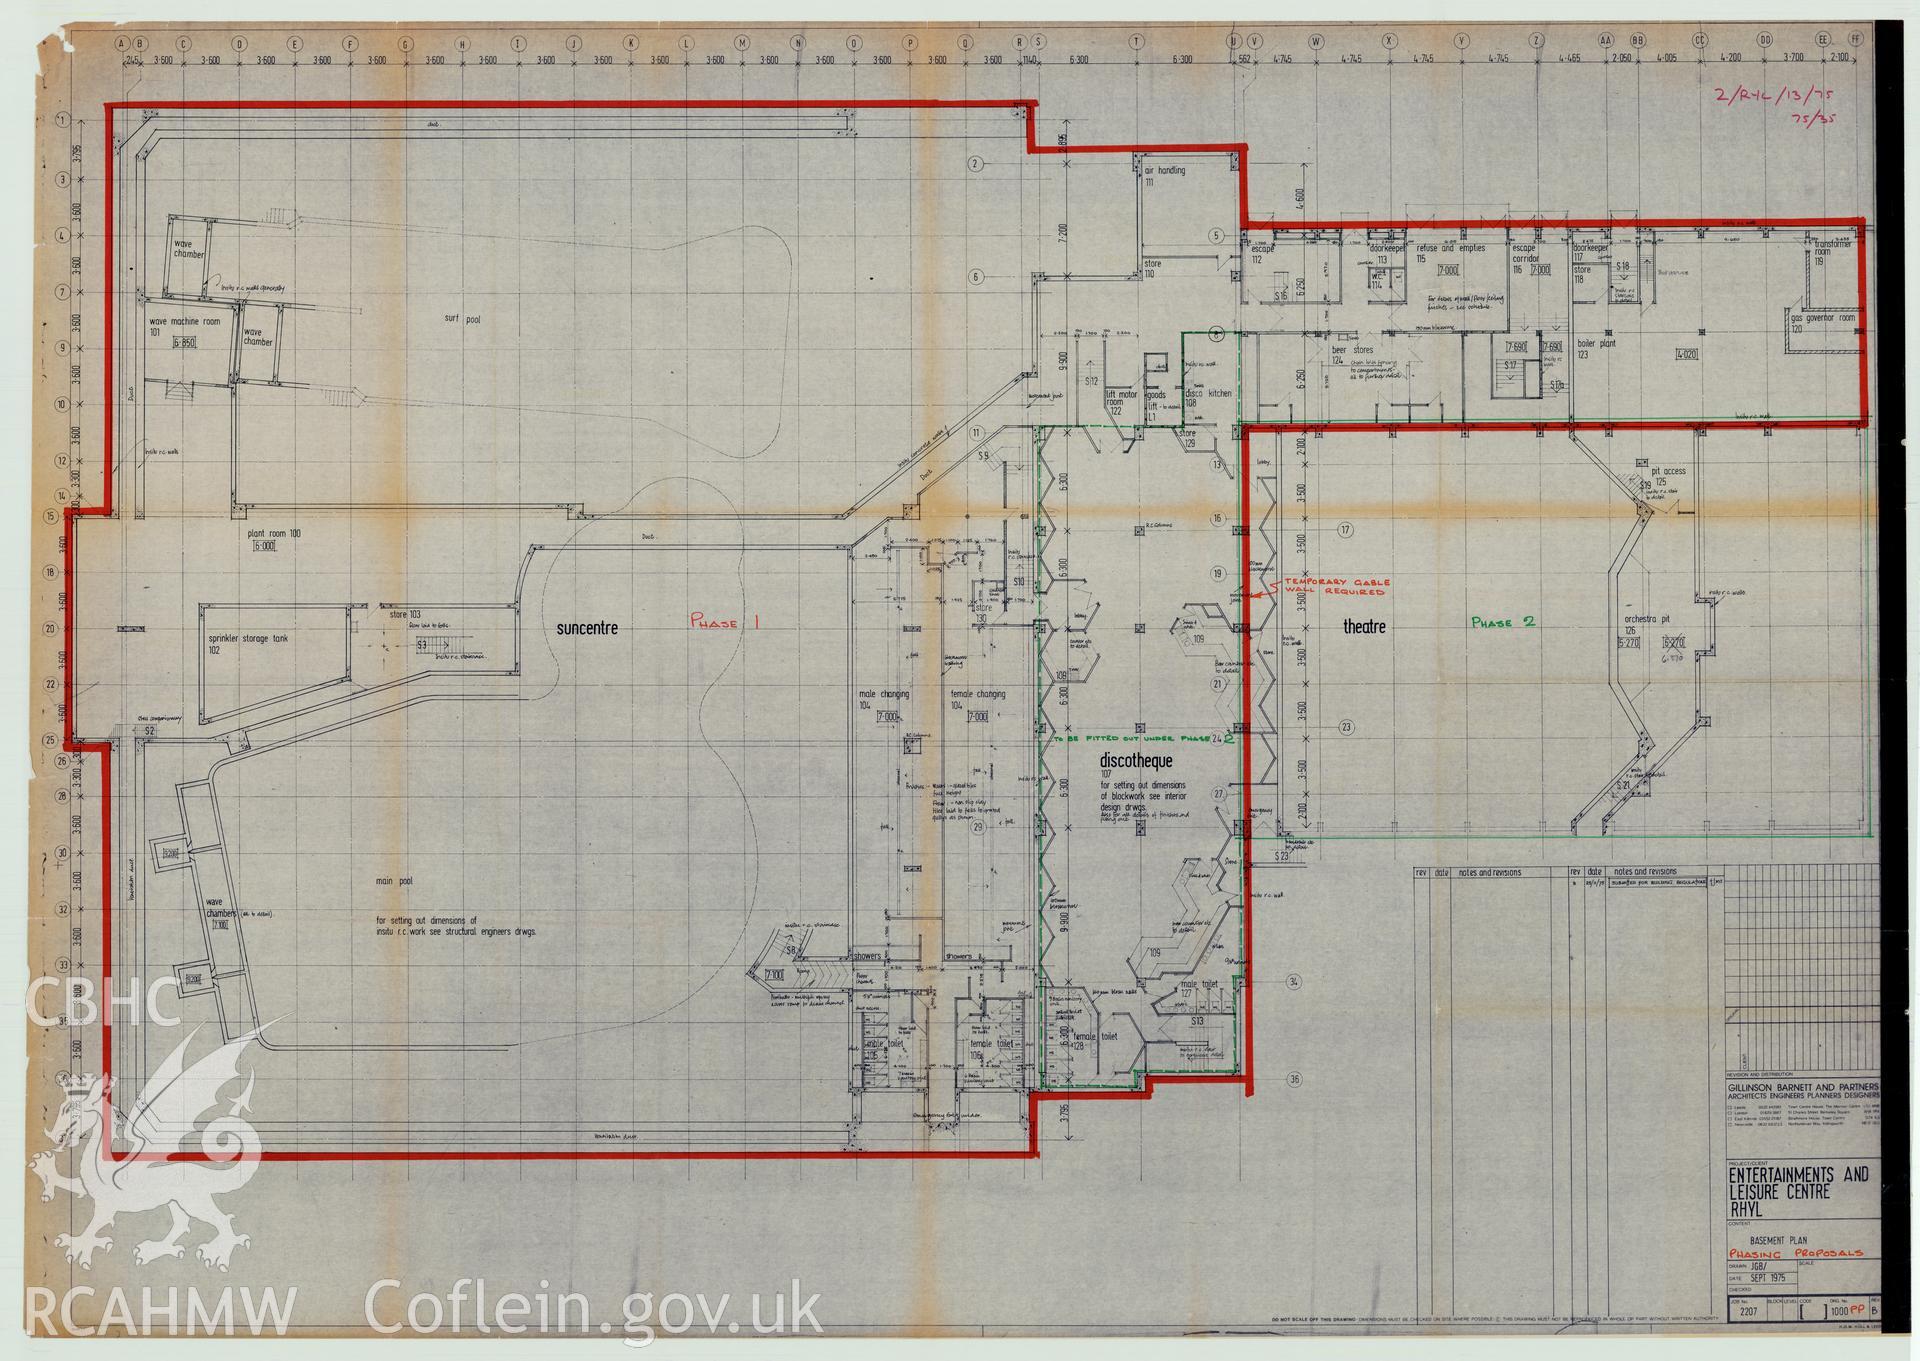 Digital copy of a measured drawing showing basement plan phasing proposals at Rhyl Sun Centre and Theatre, produced by Gillinson Barnett & Partners  1975. Loaned for copying by Denbighshire County Council.